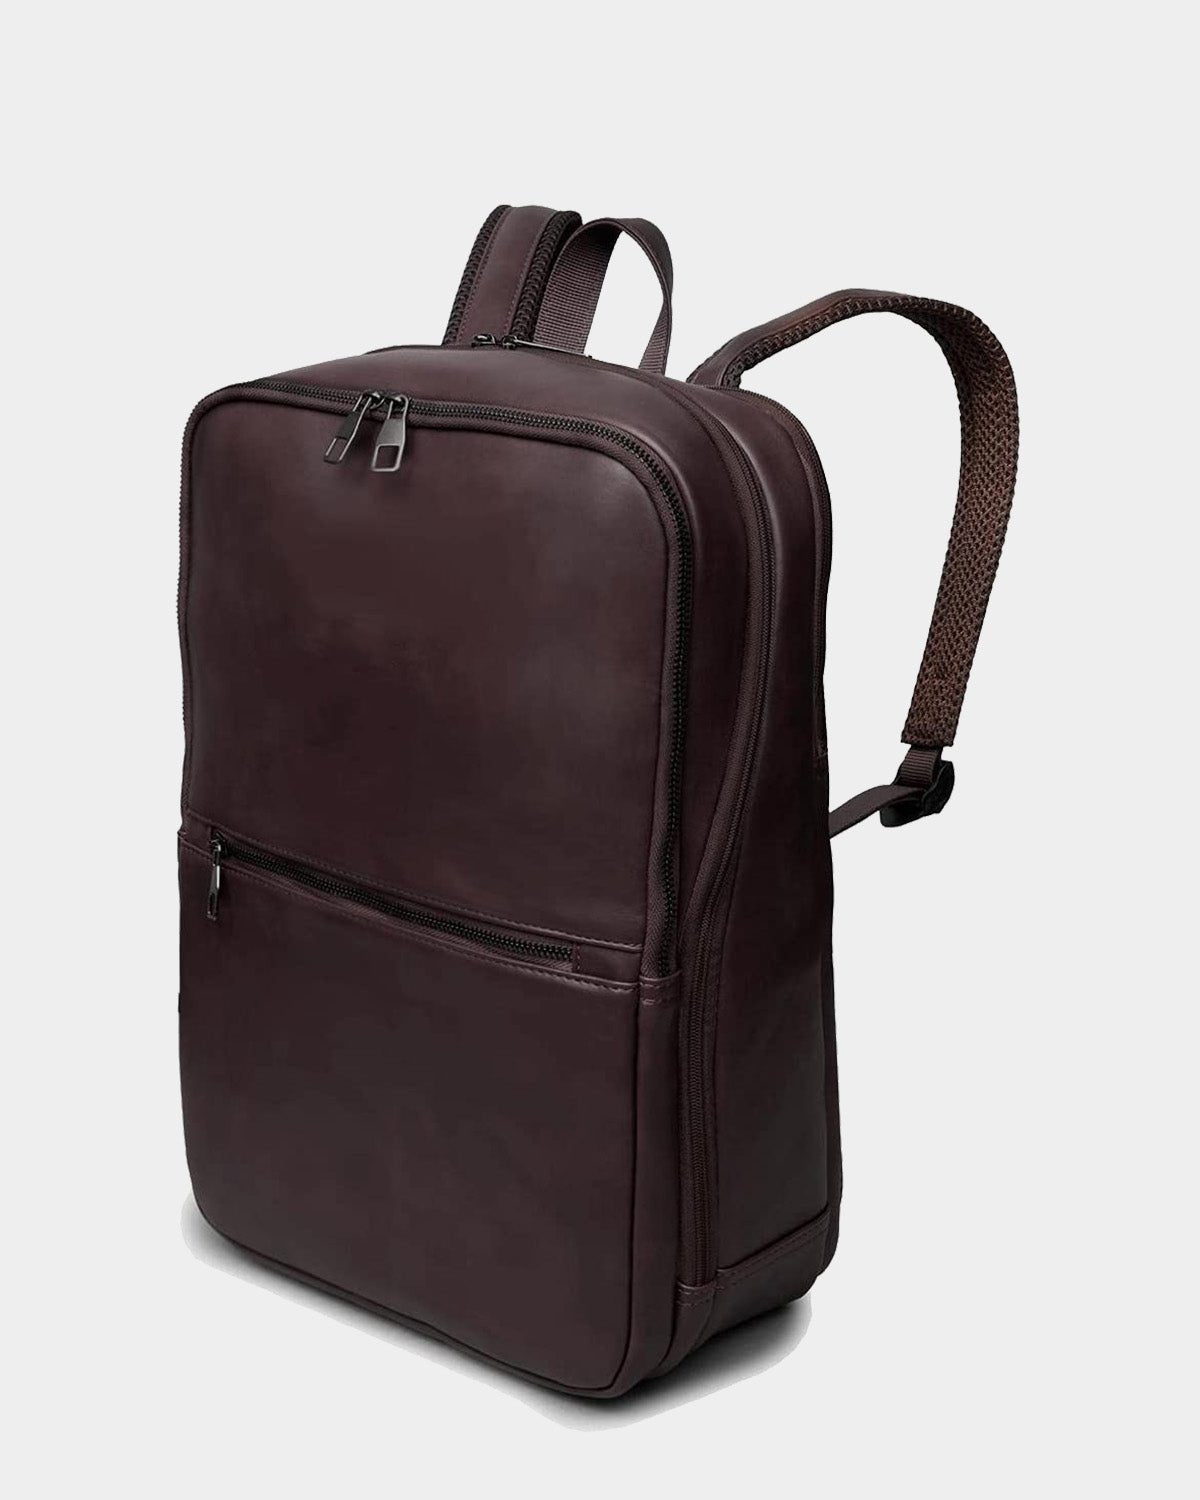 Laptop Backpack, Full Leather, 3 Color Options  99percenthandmade Brown  